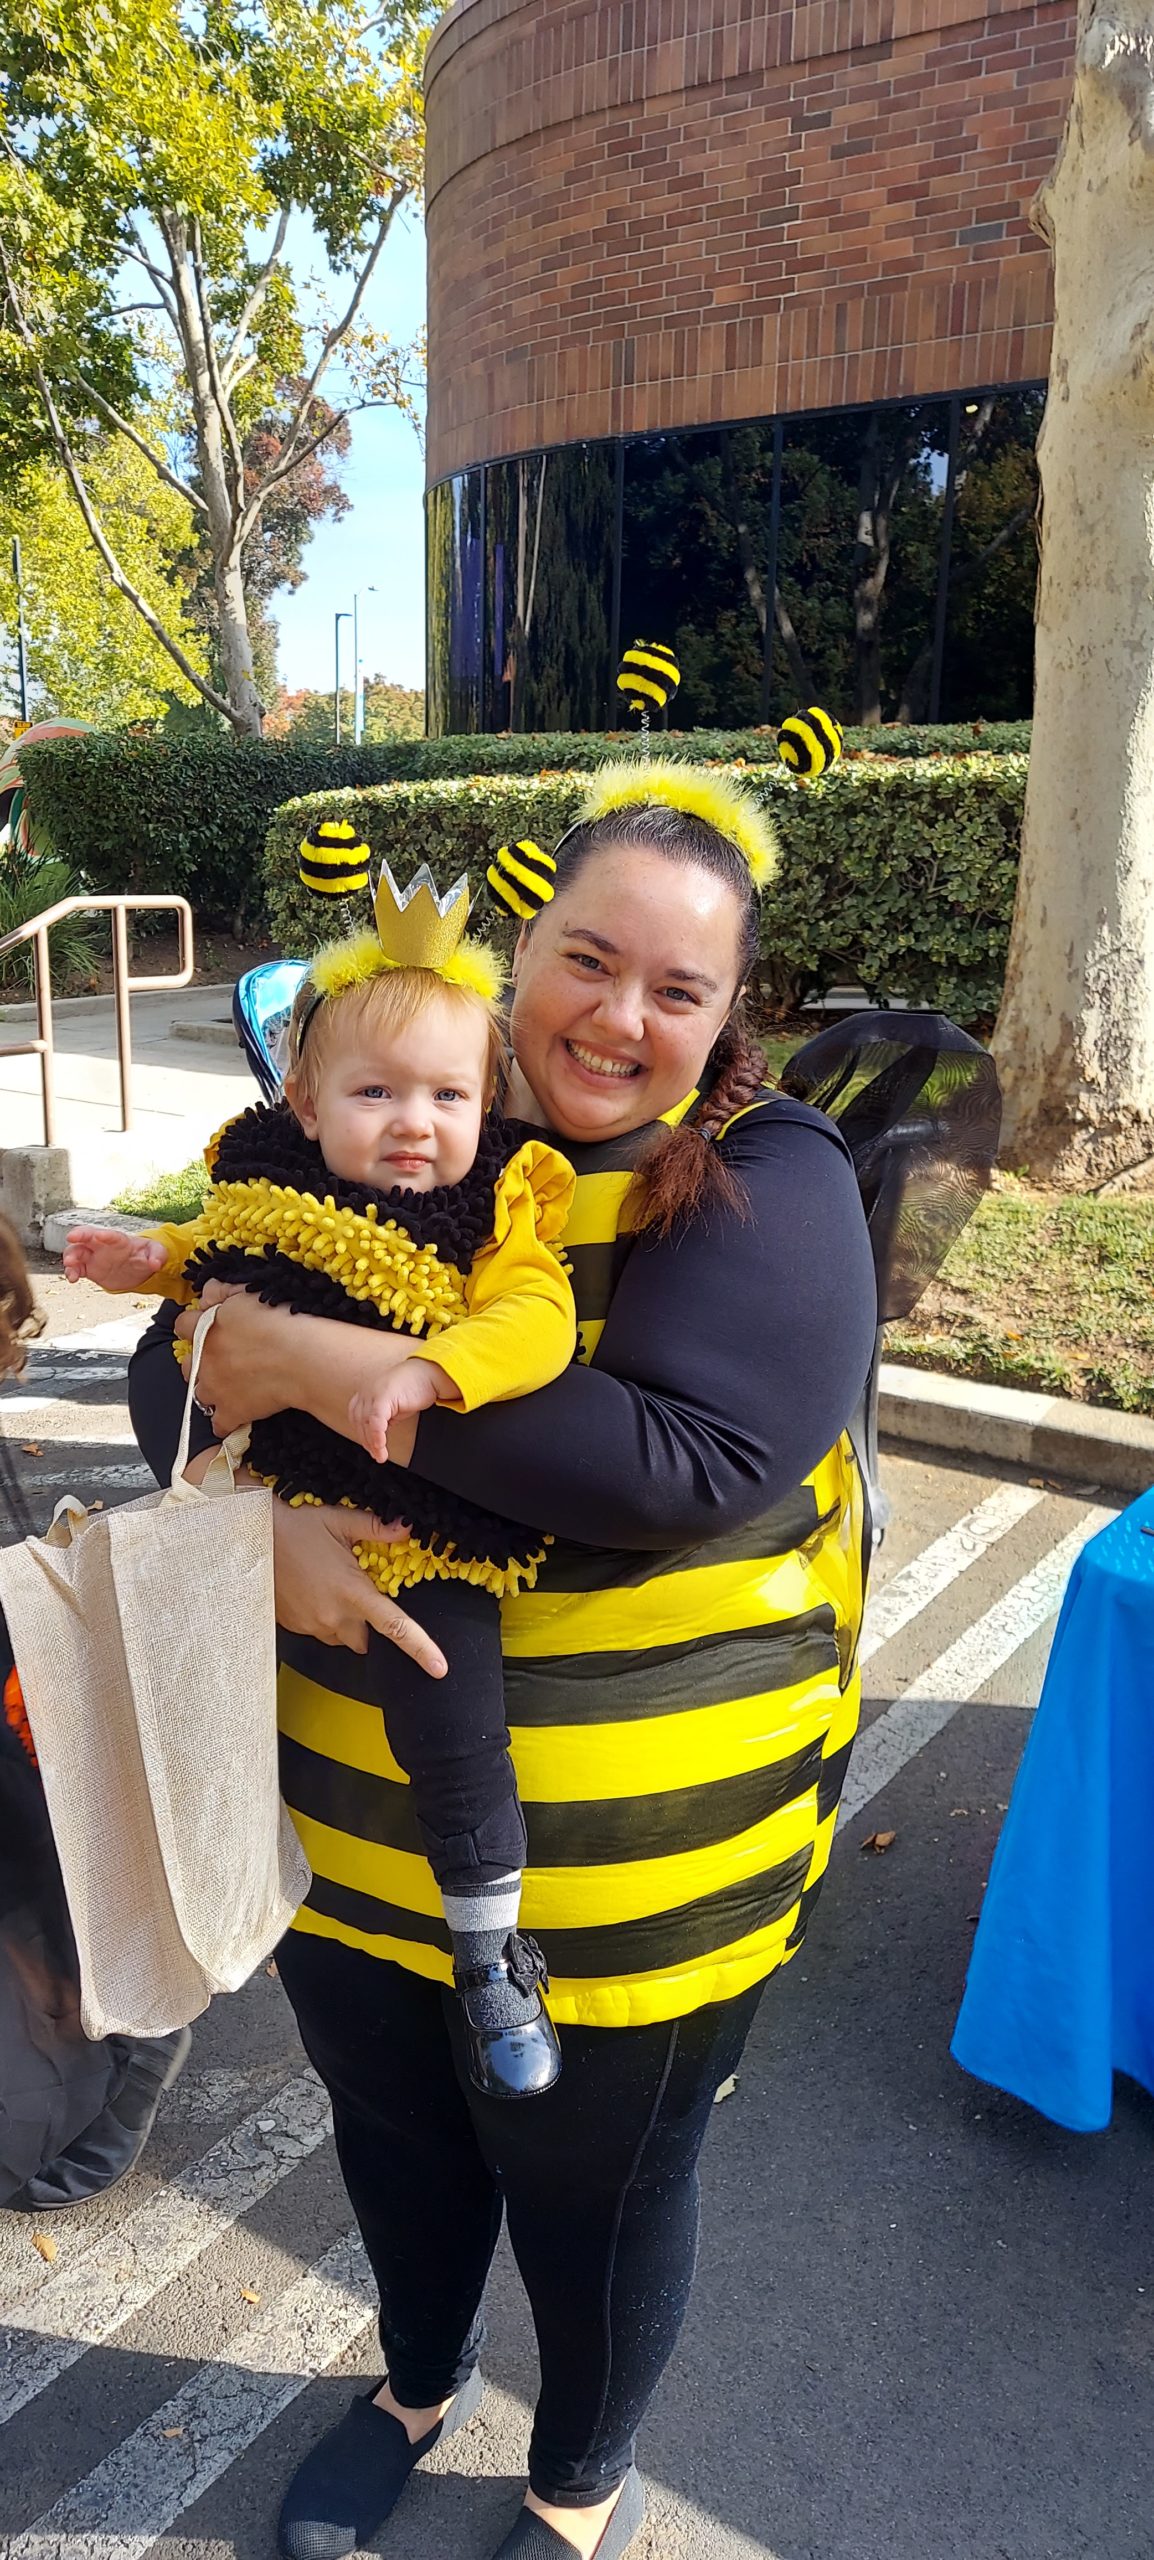 A mother dressed as a bumblebee smiles while holding her baby, dressed as a queen bumblebee.